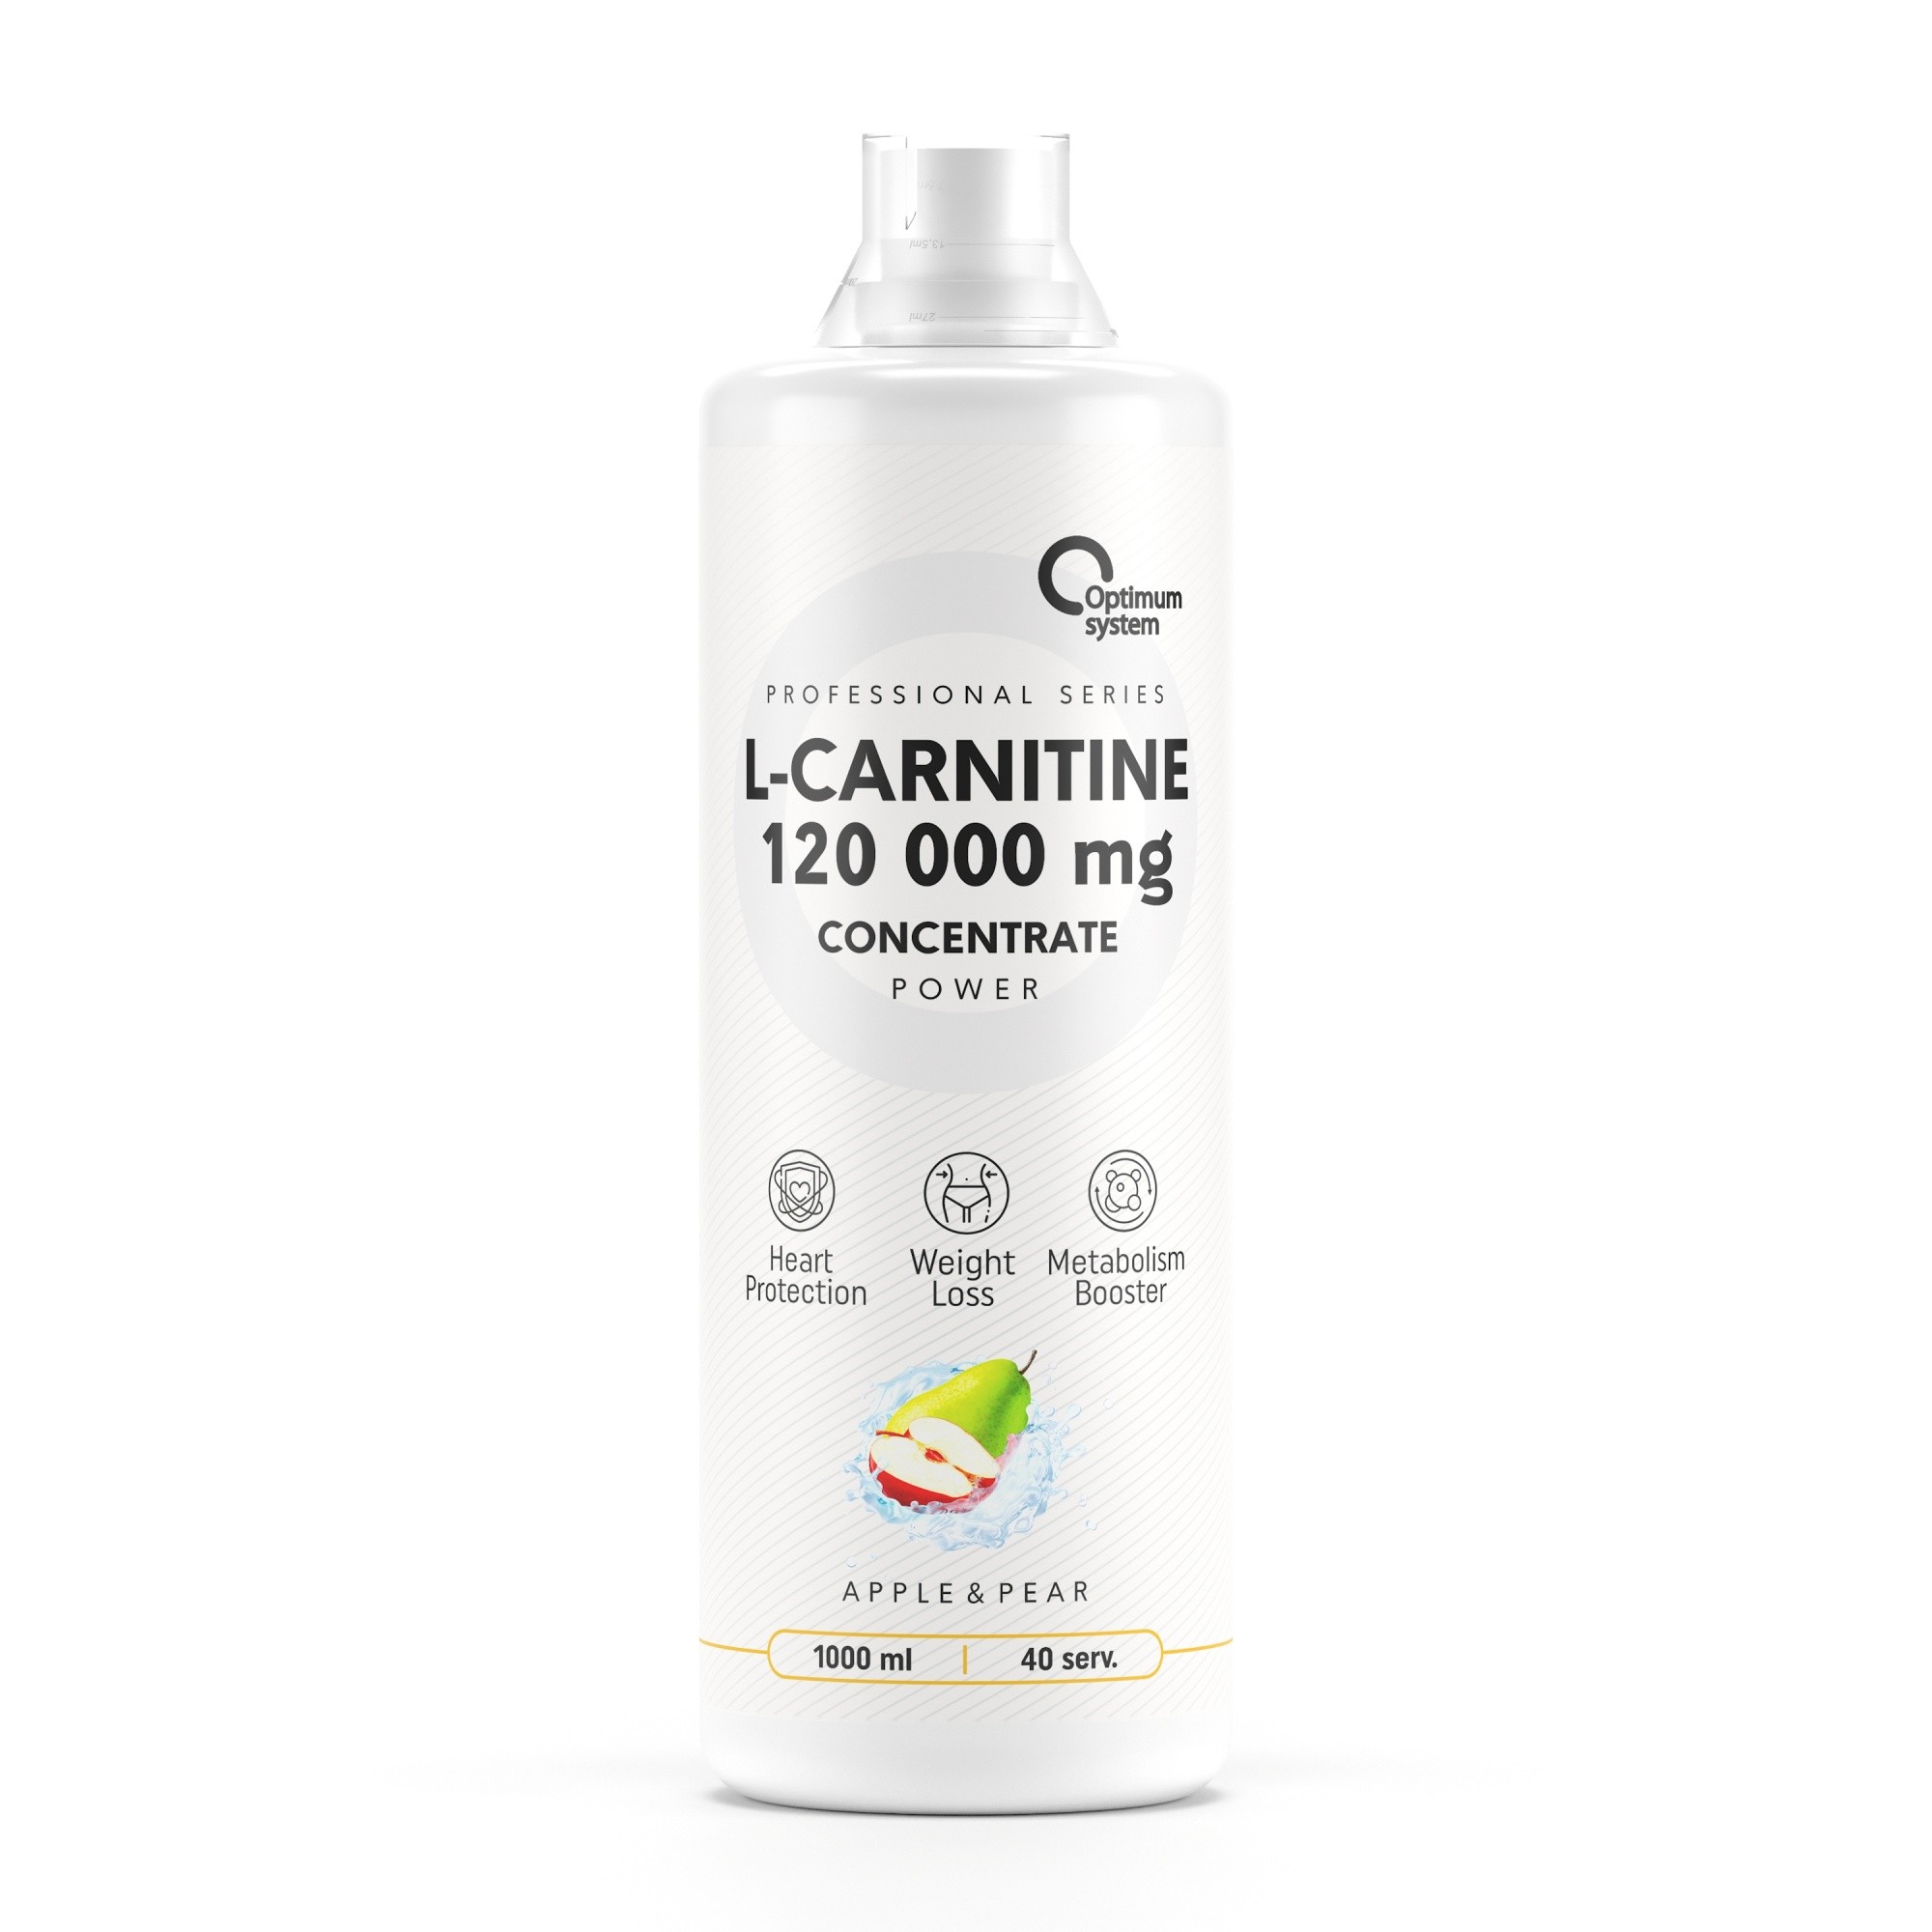 L-Carnitine Concentrate 120 000 POWER